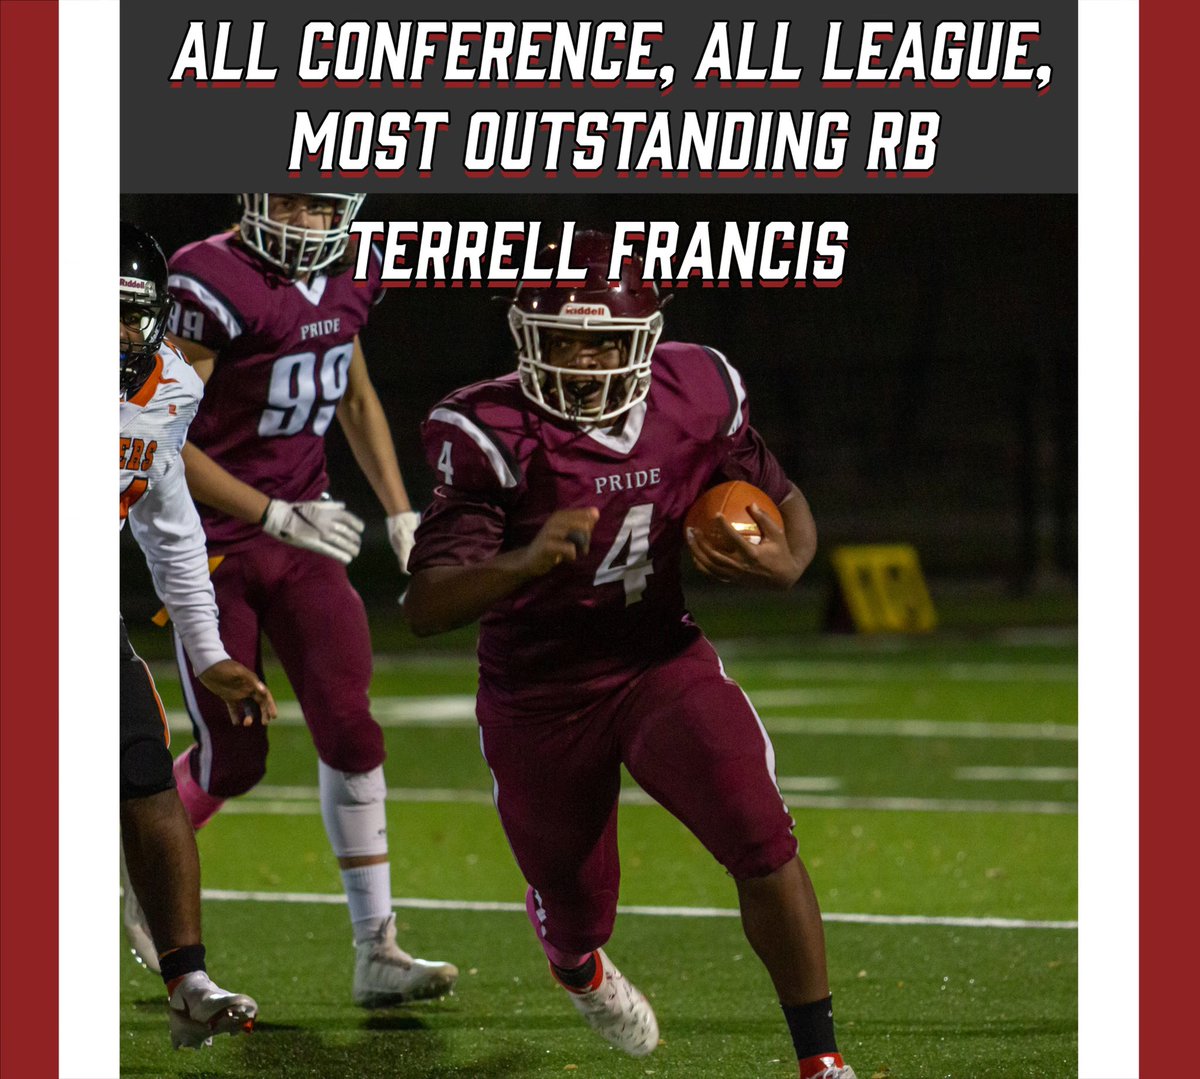 Congratulations to this Sr. RB…Terrell is a “workhorse” type back, who got better with each carry! #BeastMode #RollPride